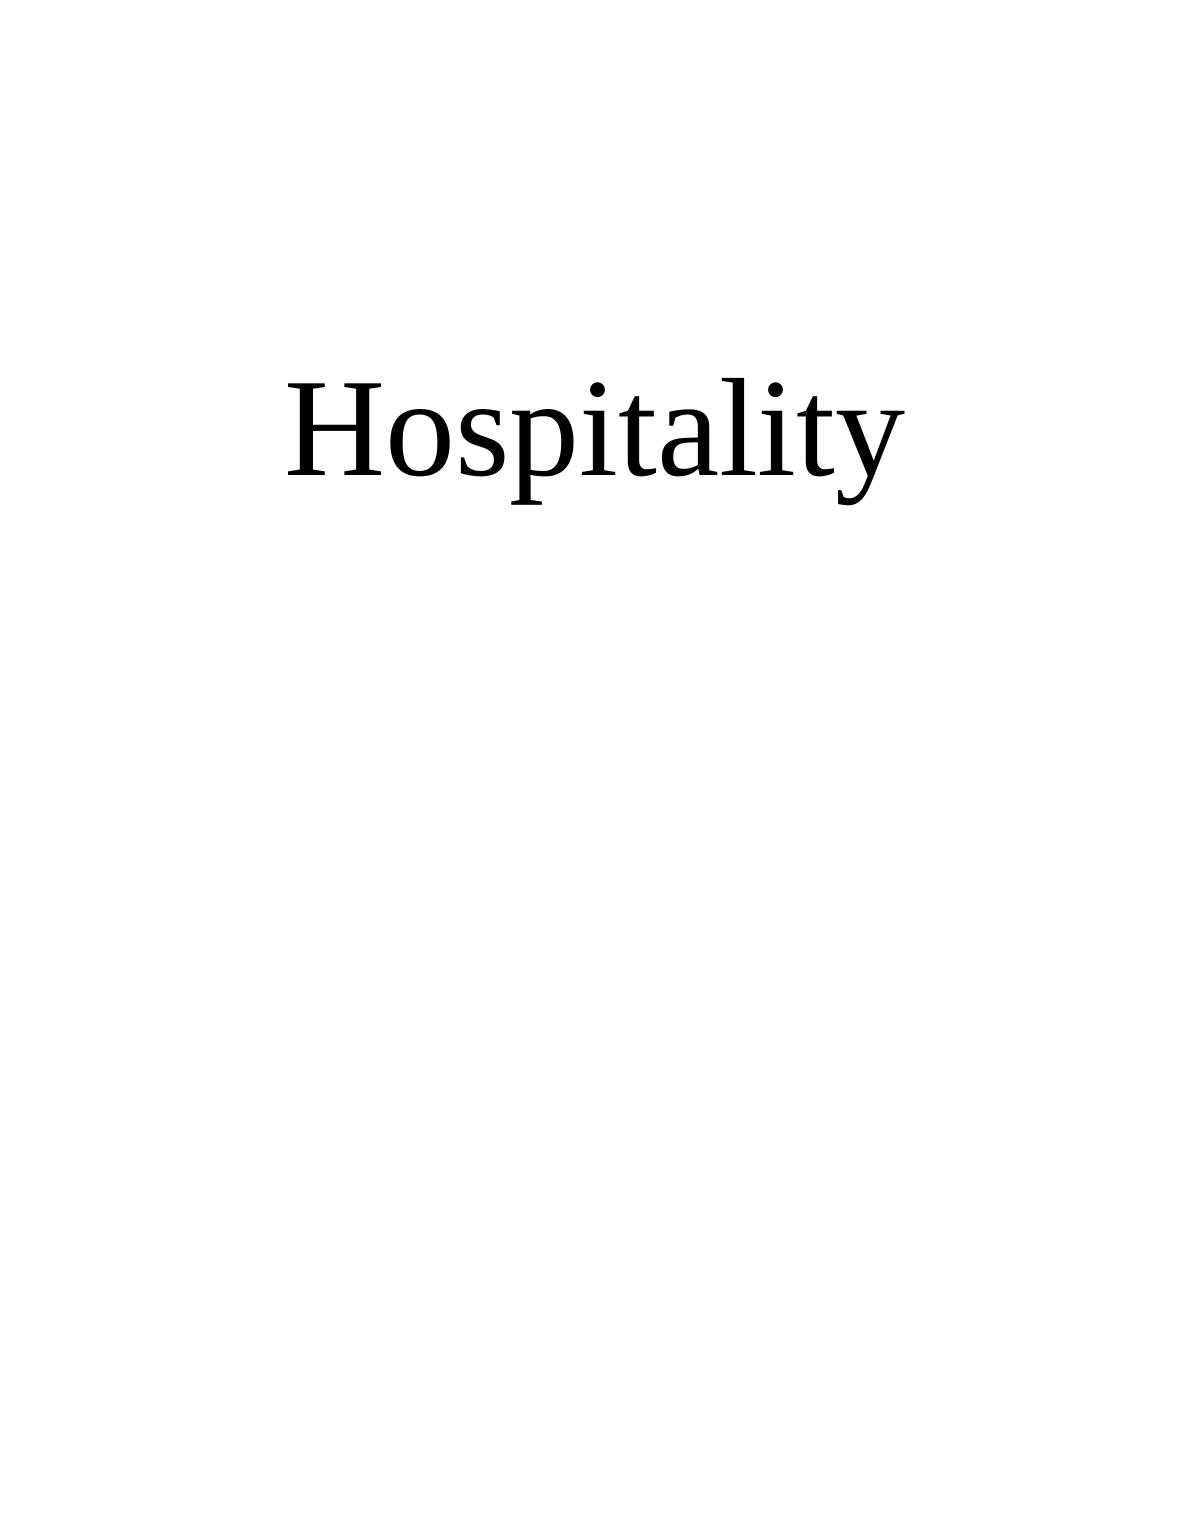 Hospitality Industry: Businesses, Departments, Contribution, Roles and Skills_1